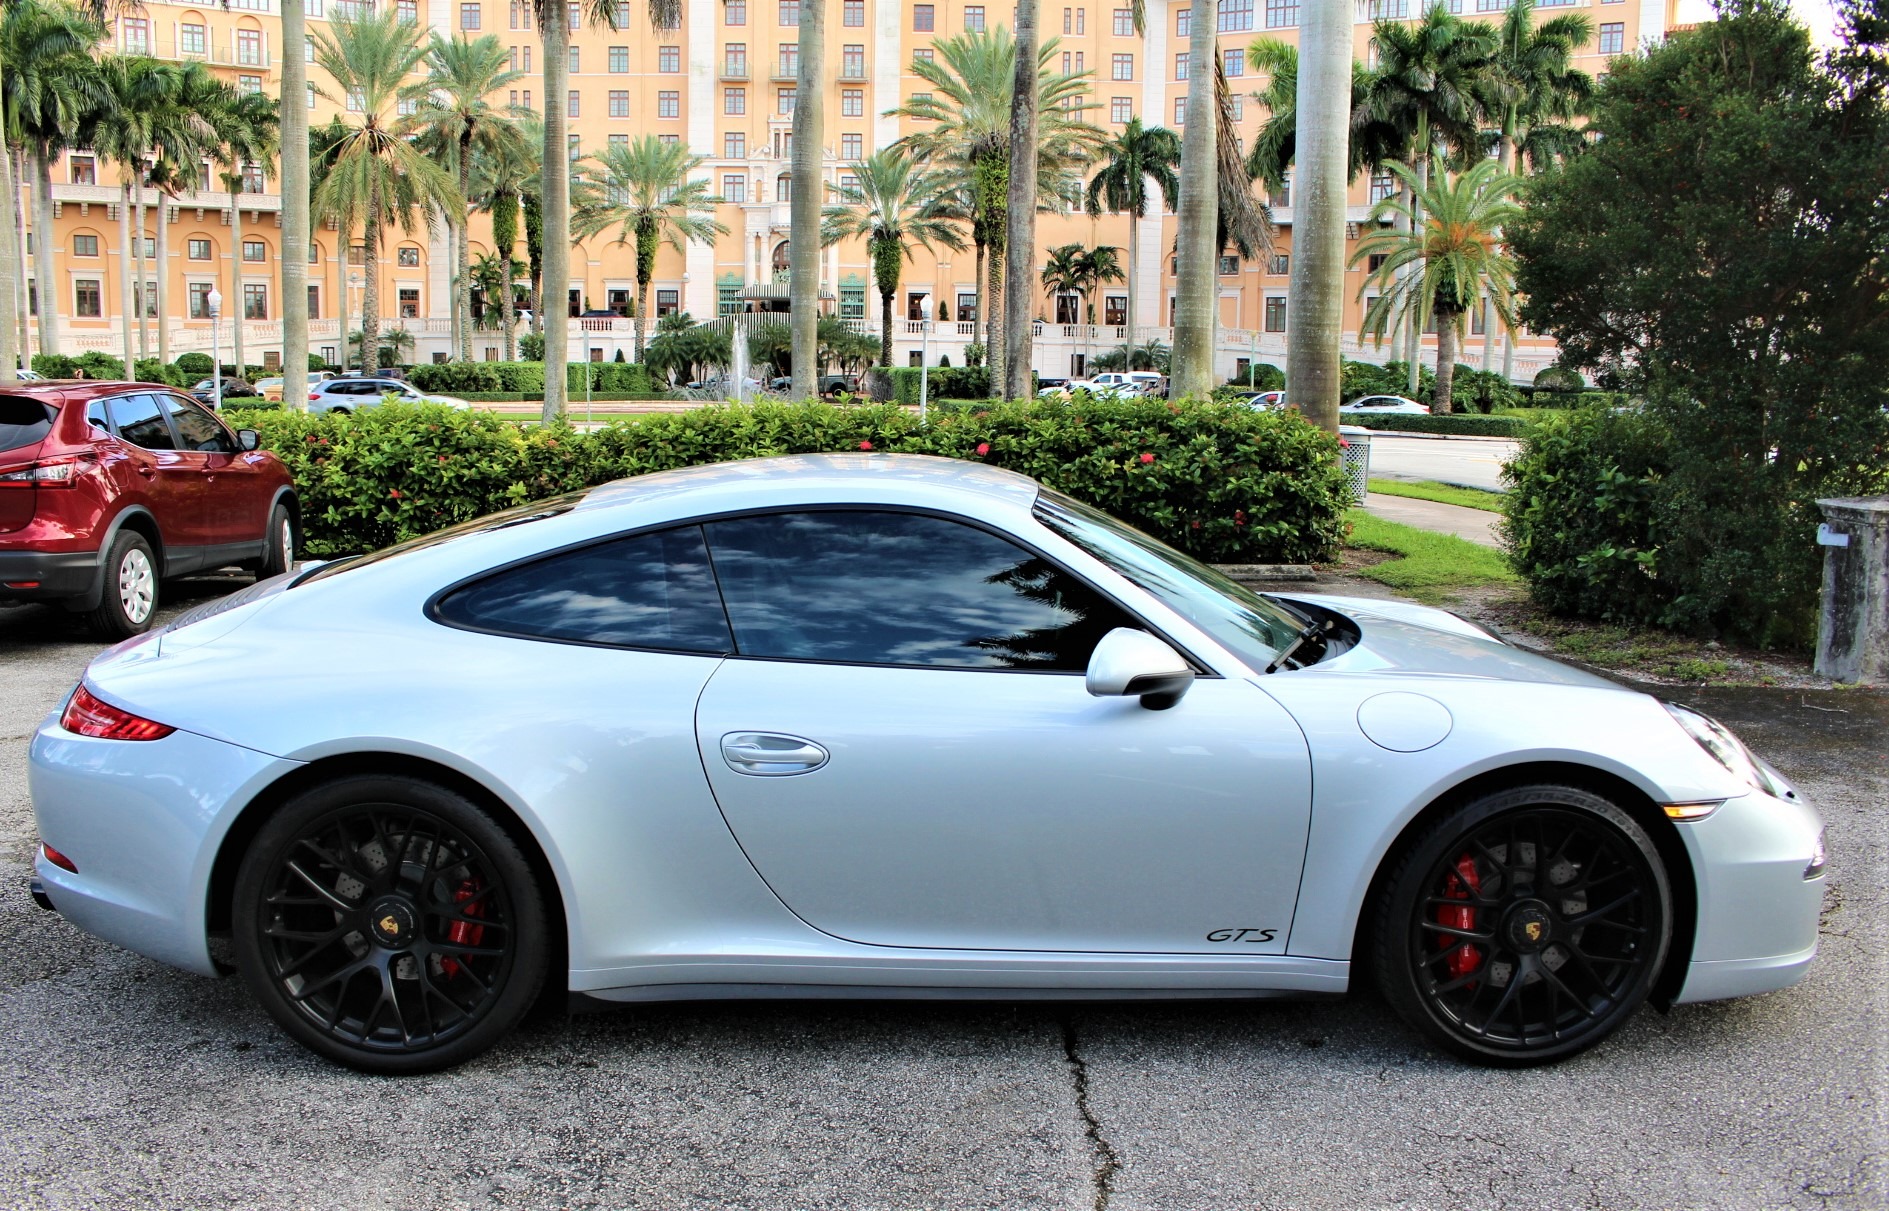 Used 2015 Porsche 911 Carrera GTS for sale Sold at The Gables Sports Cars in Miami FL 33146 3